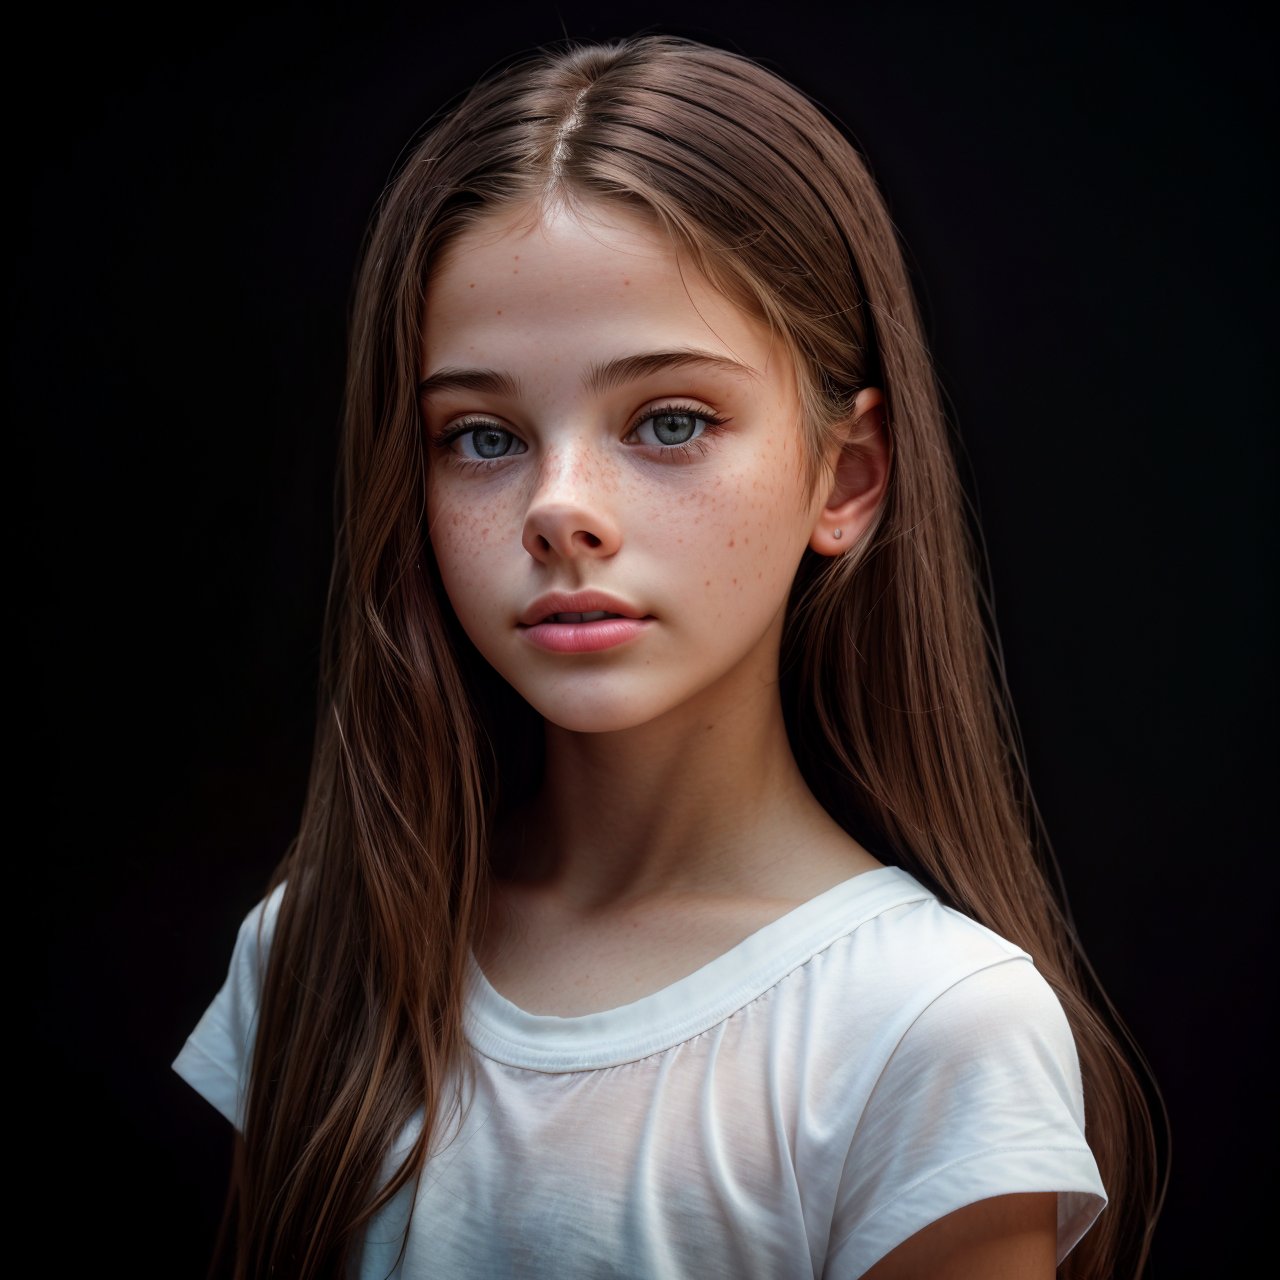 best quality, extra resolution, close up portrait of adorable (AIDA_LoRA_MeW2016:1.1) <lora:AIDA_LoRA_MeW2016:0.9> in (simple white t-shirt:1.1), [little girl], glossy skin with visible pores and freckles, pretty face, naughty, playful, intimate, flirting, cinematic, studio photo, kkw-ph1, (colorful:1.1), (charcoal smoky black background:1.1)